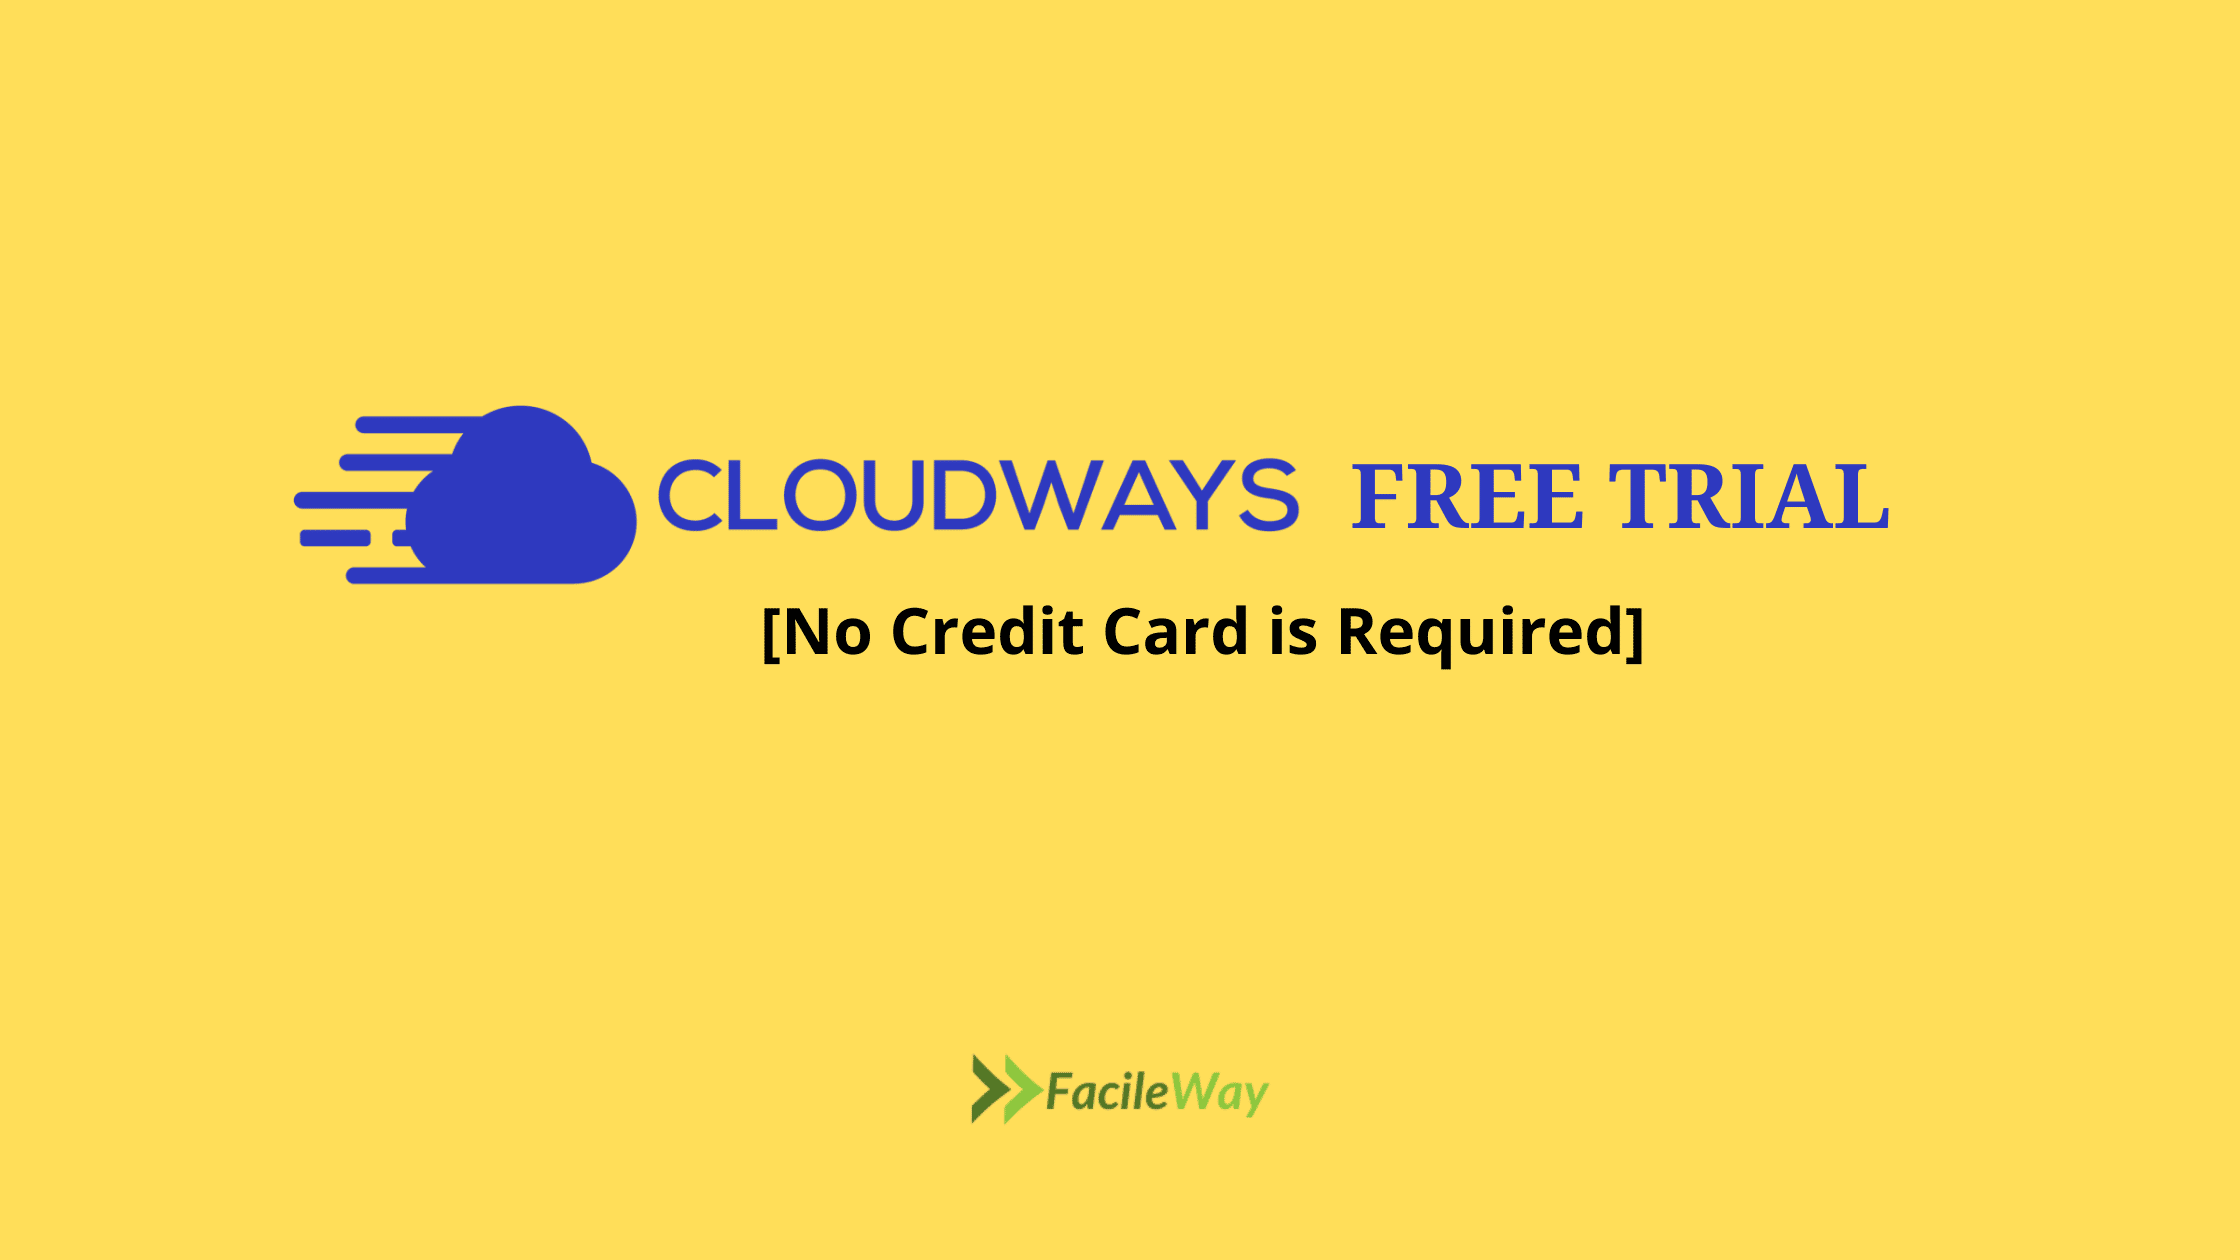 Cloudways free trial